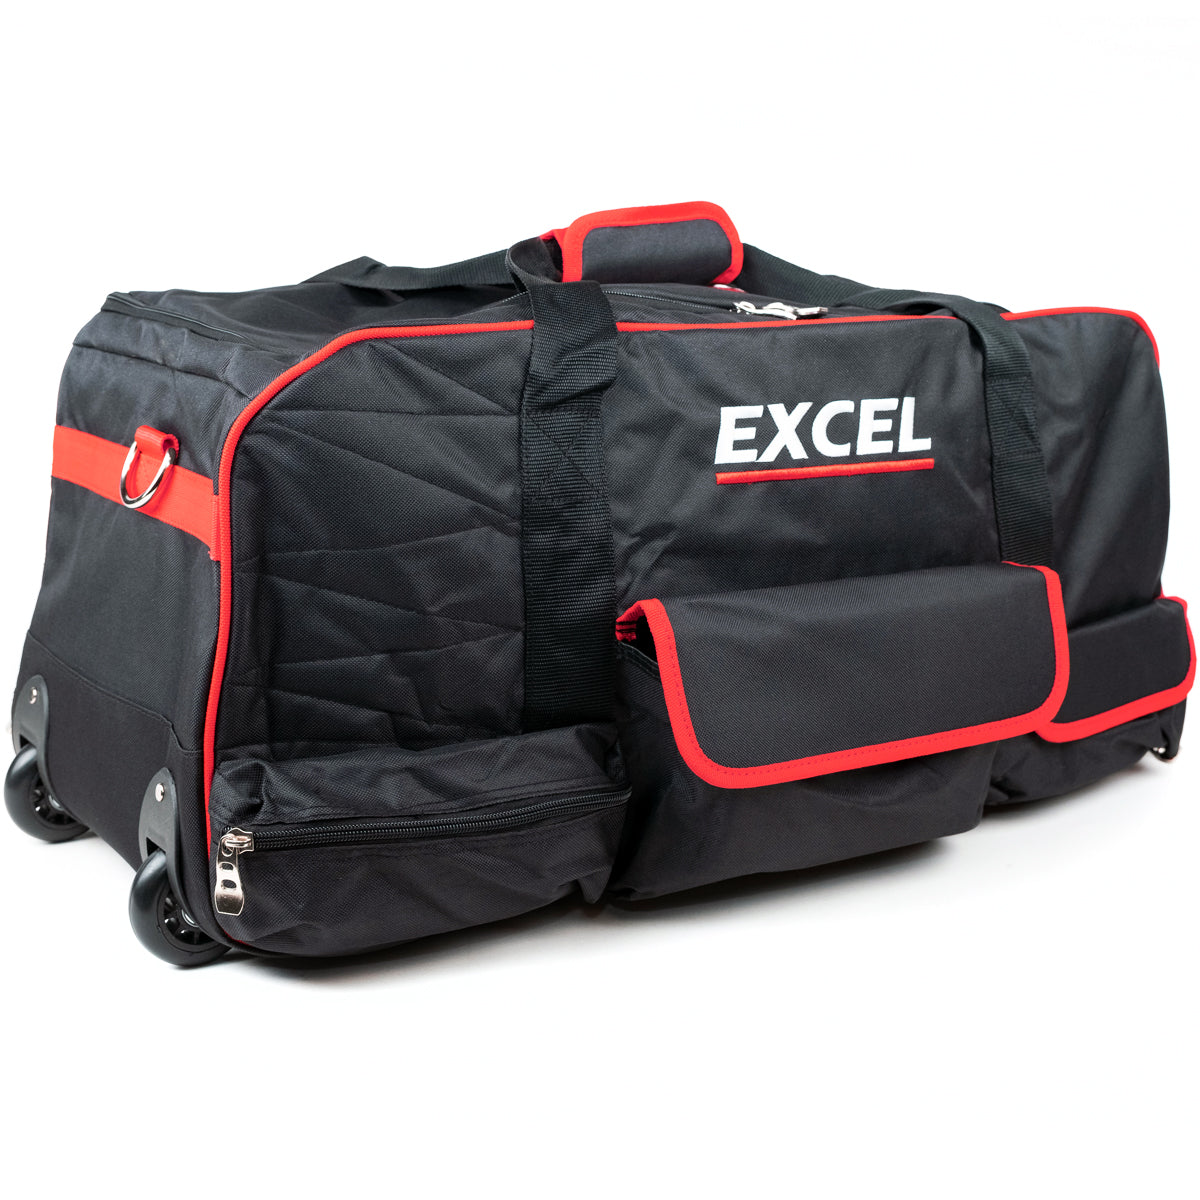 Excel 18V 10 Piece Power Tool Kit with 4 x 5.0Ah Batteries & Charger EXLKIT-16295